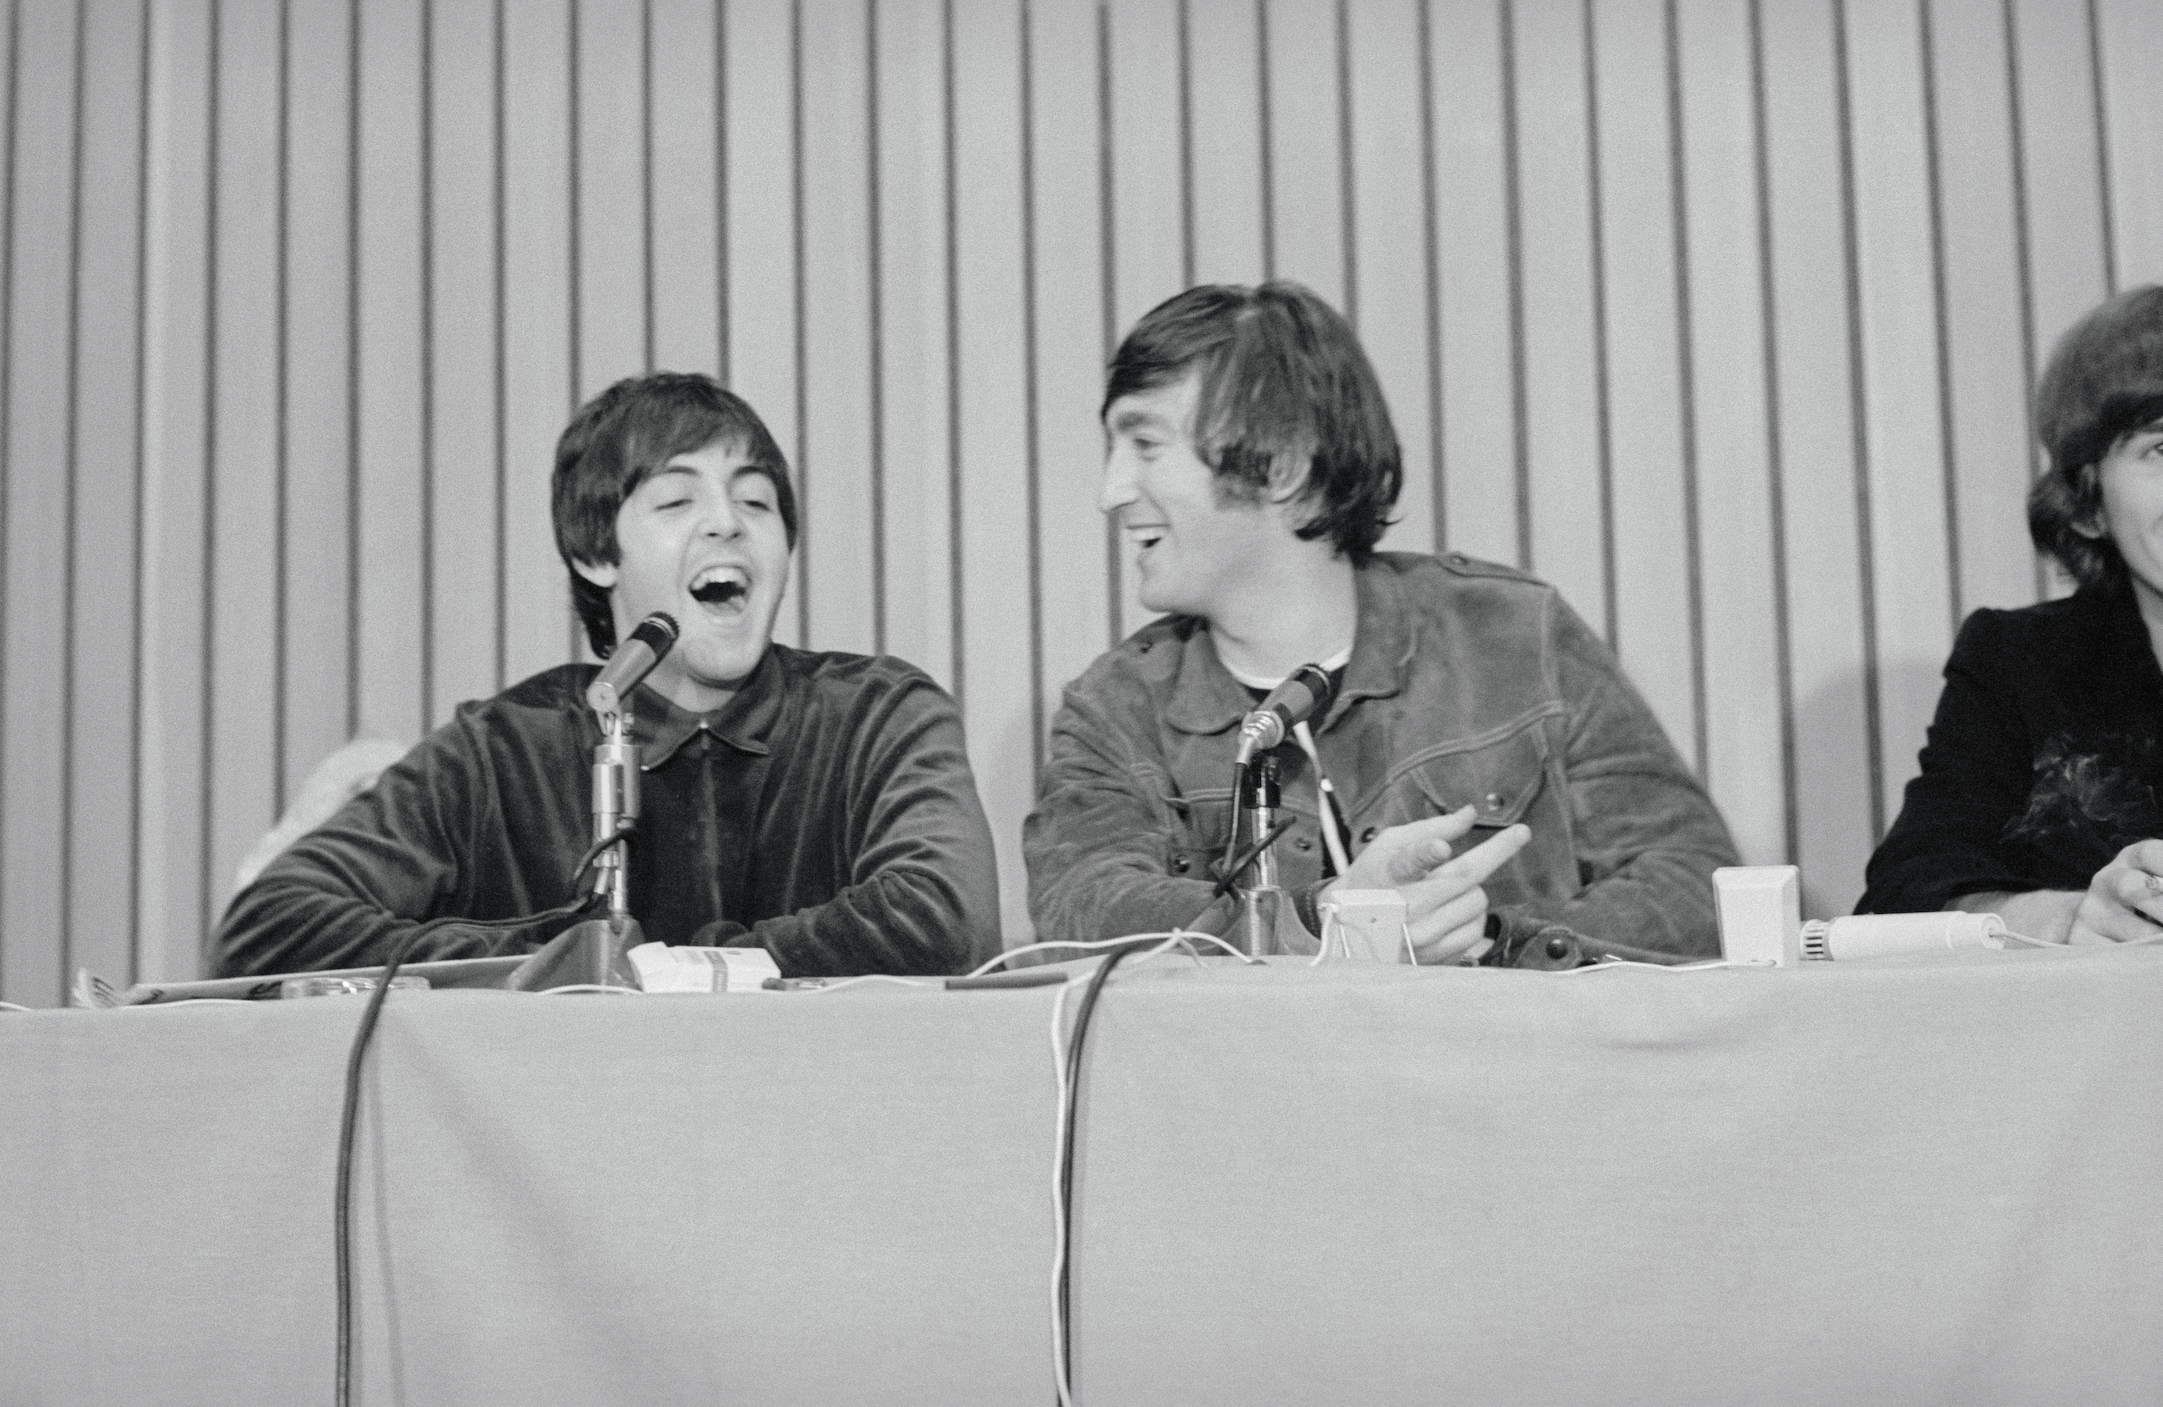 Paul McCartney and John Lennon at a press conference after The Beatles performance in Portland